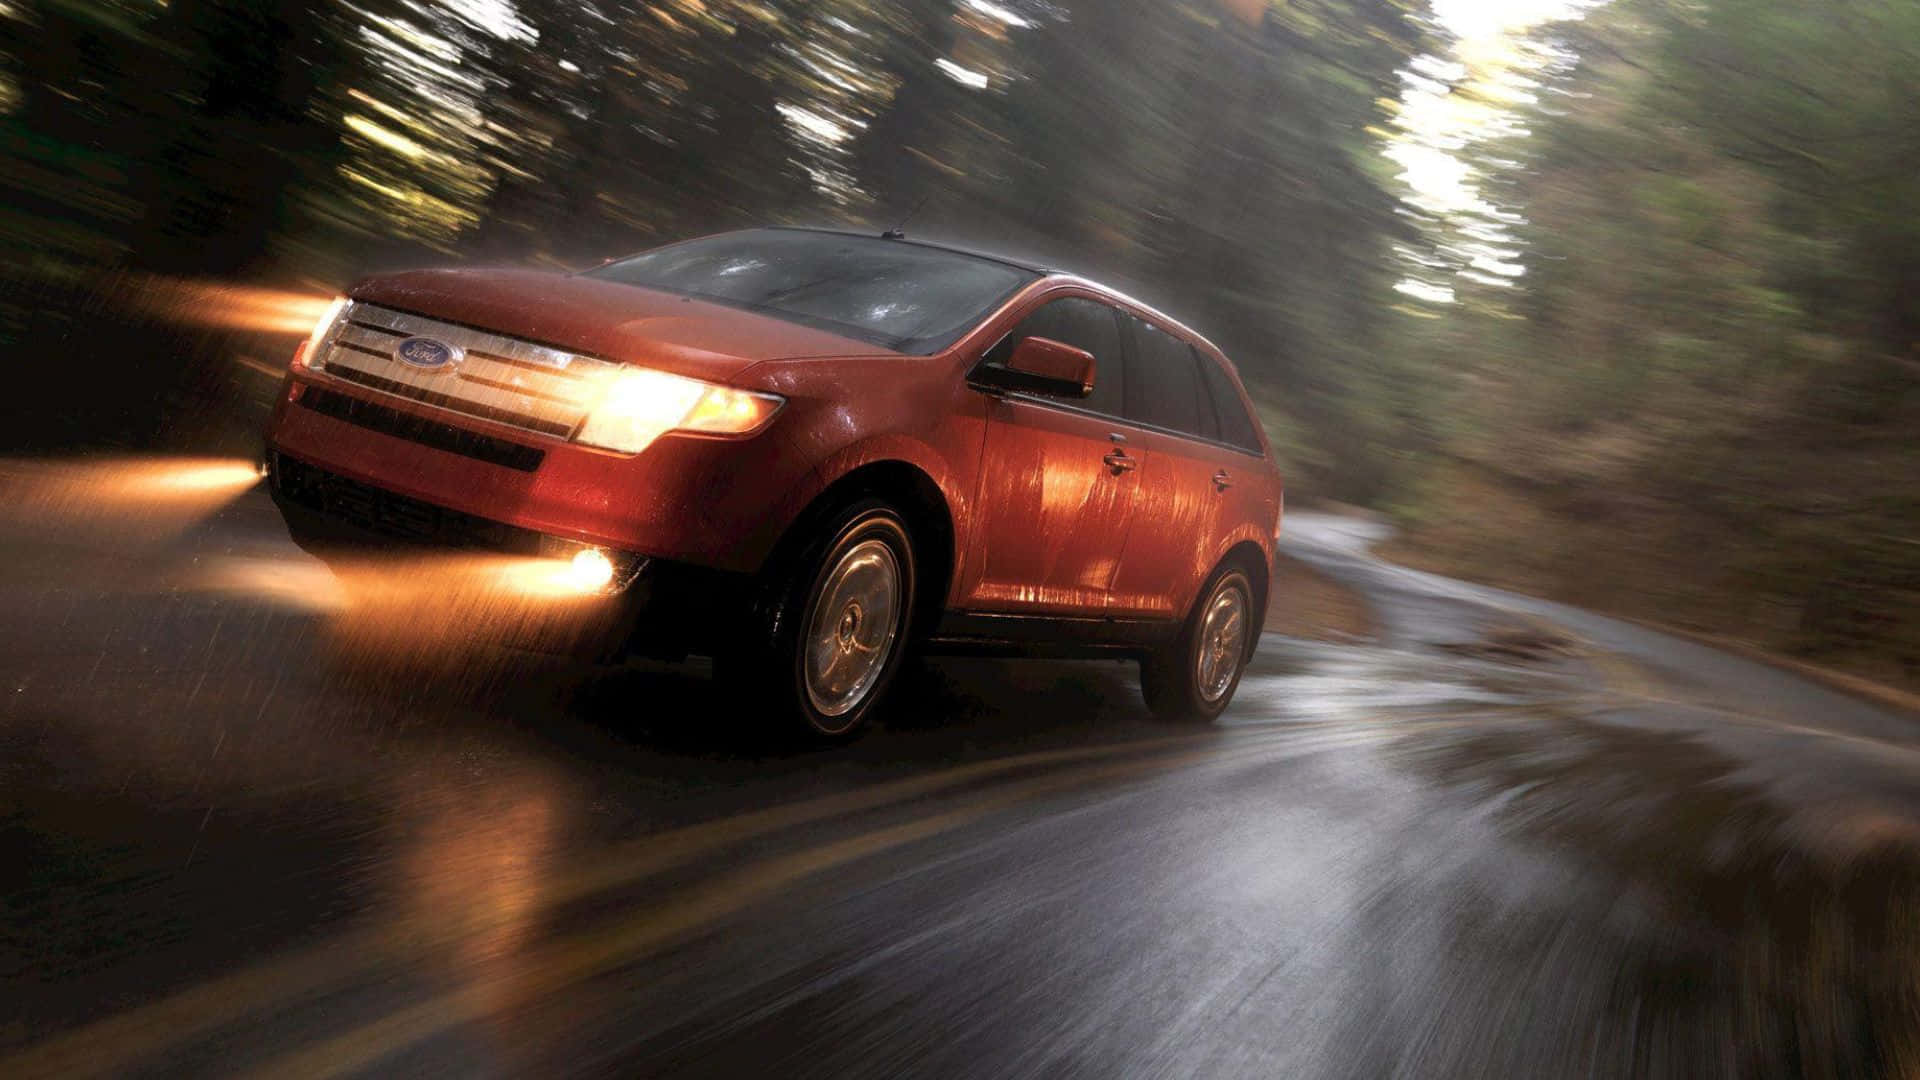 Stunning Ford Edge in motion on the road Wallpaper